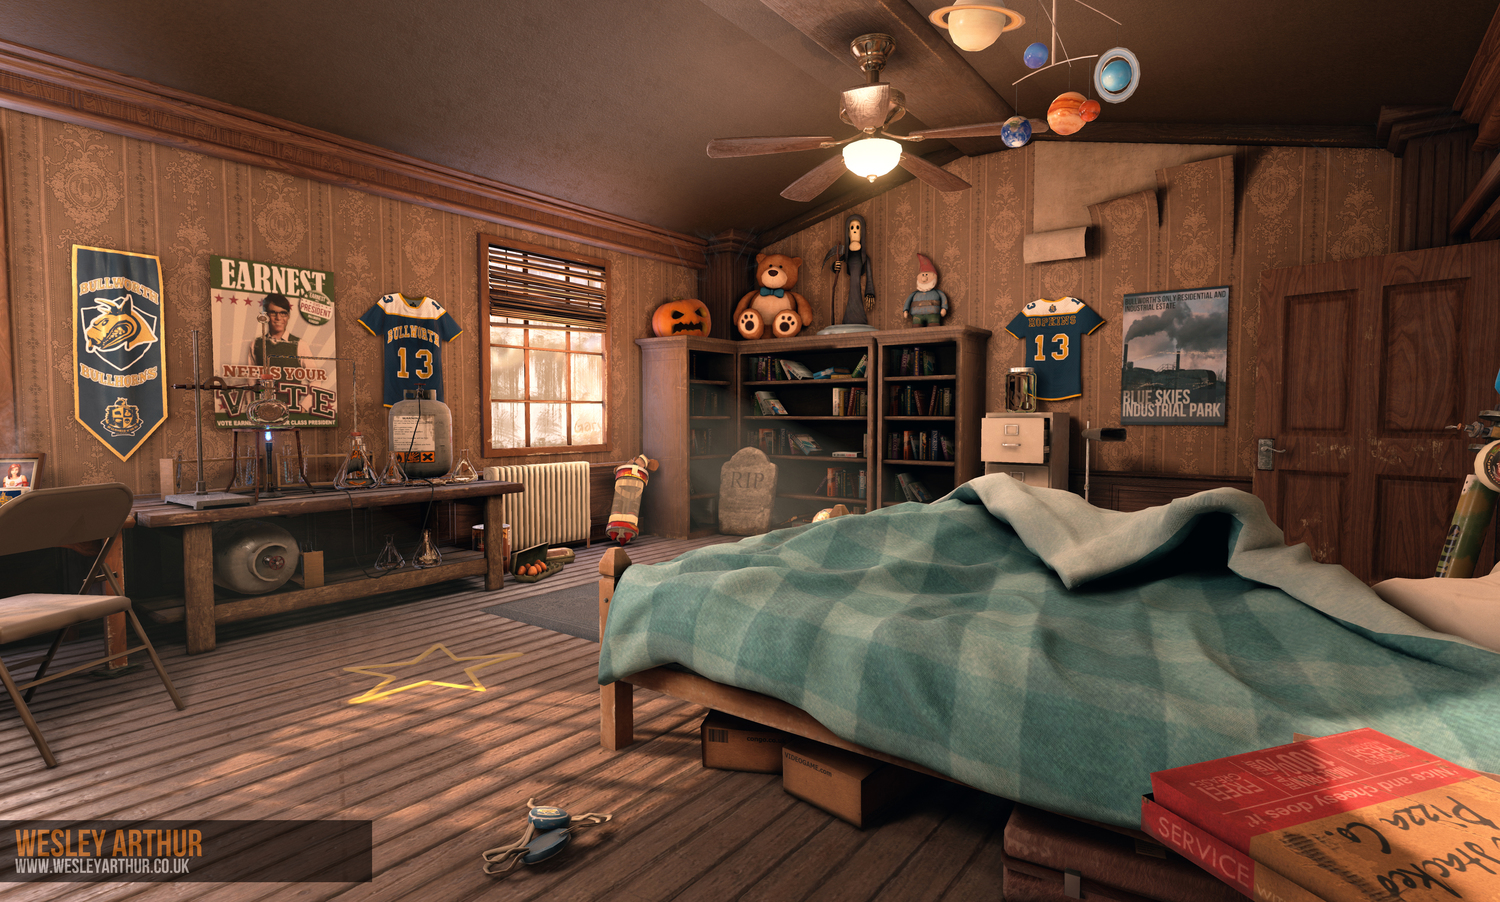 Bullworth Academy From Rockstar’s Bully Gets An HD Makeover